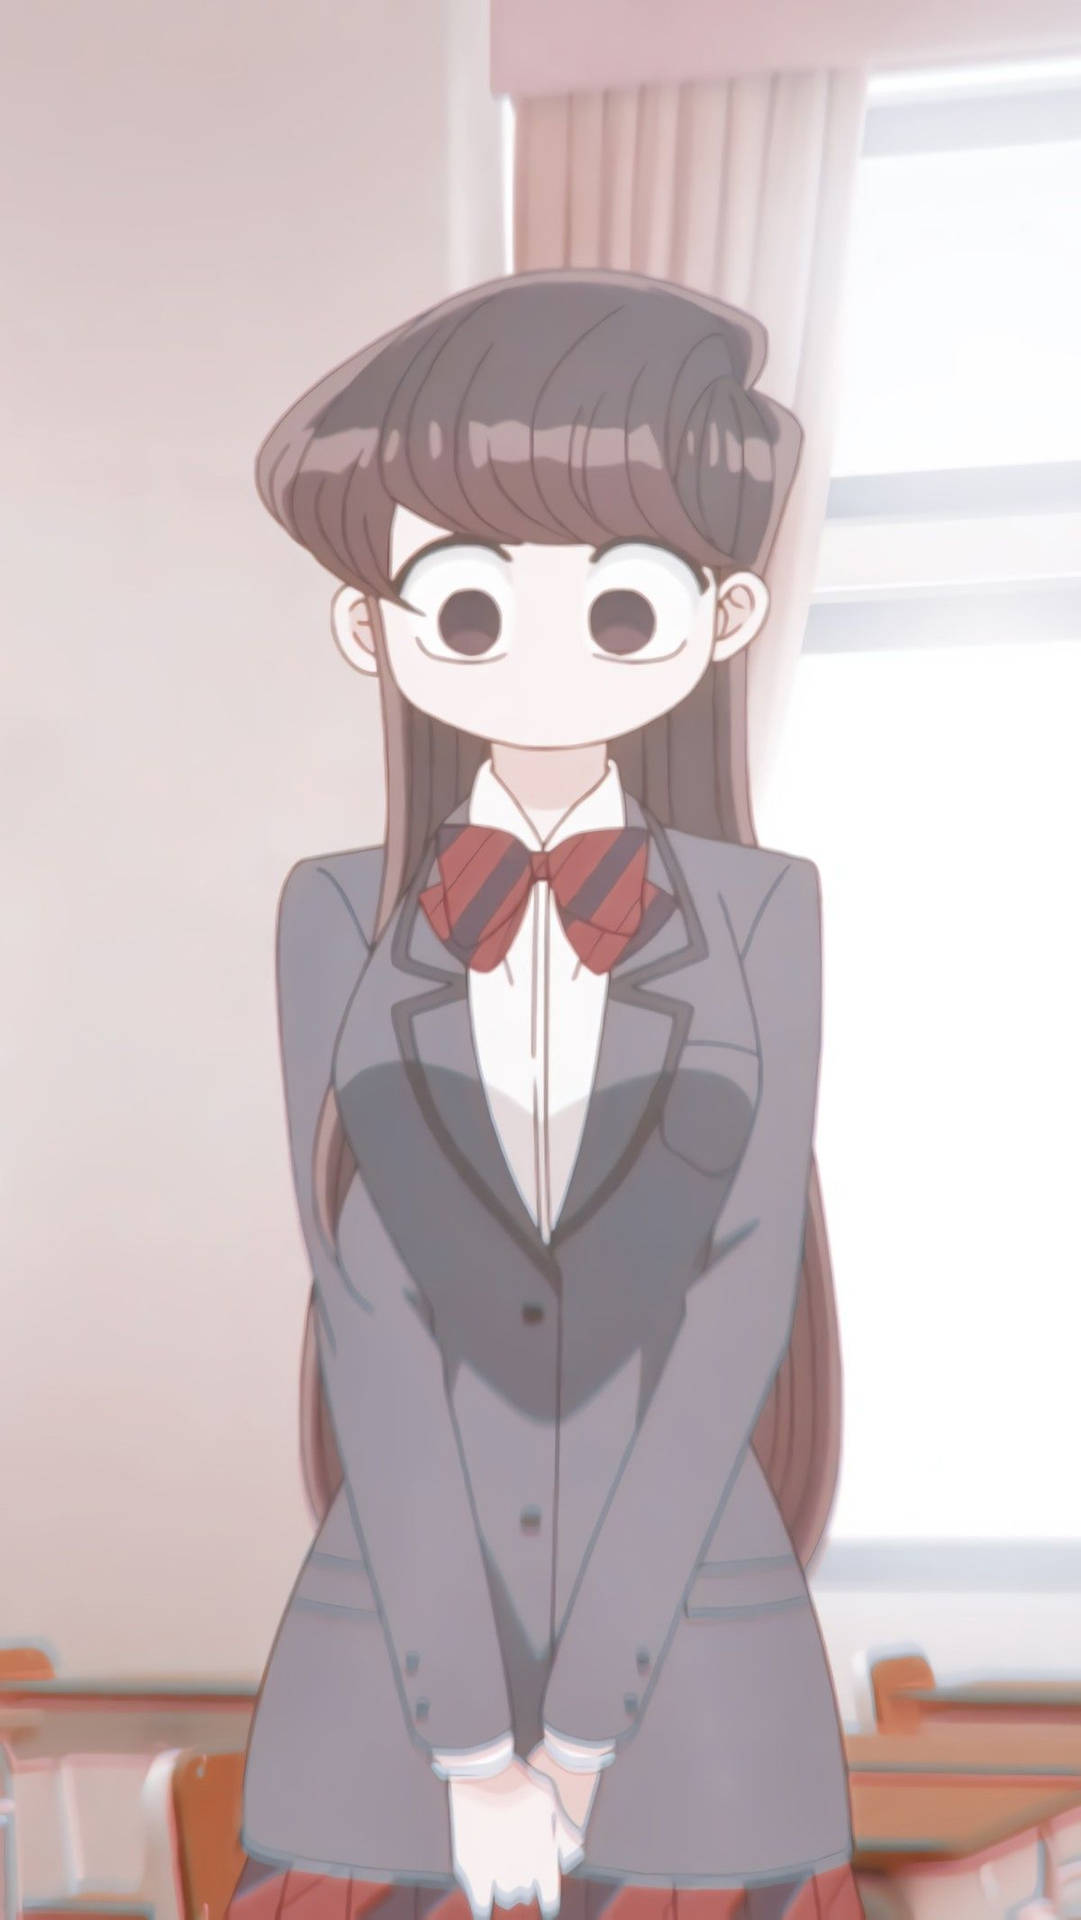 "Komi Can't Wait to Make Connections and Open Lines of Communication" Wallpaper